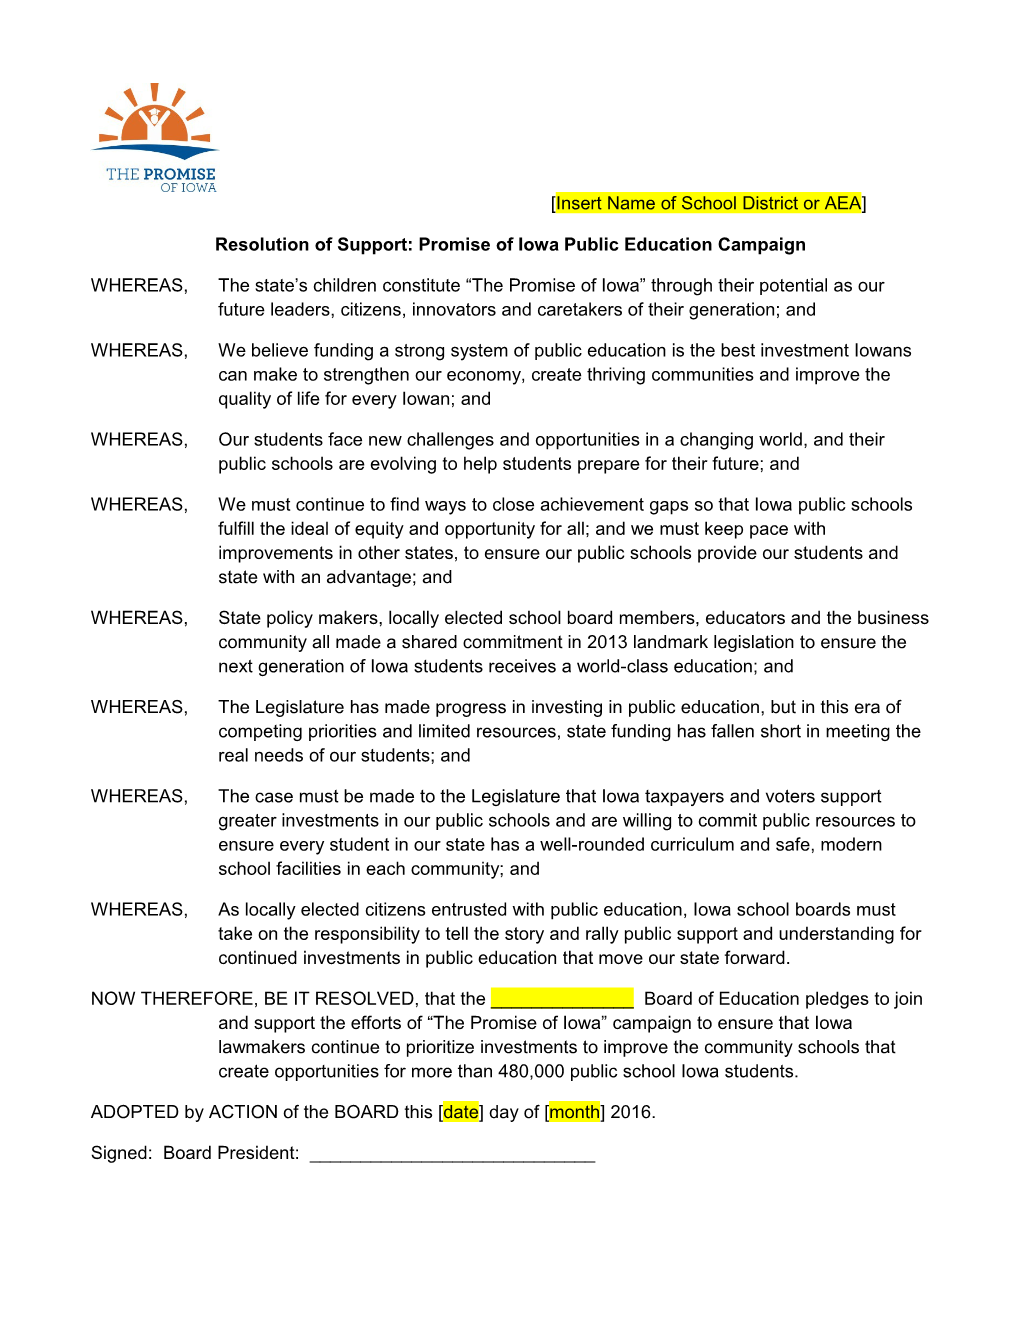 Resolution of Support: Promise of Iowa Public Education Campaign